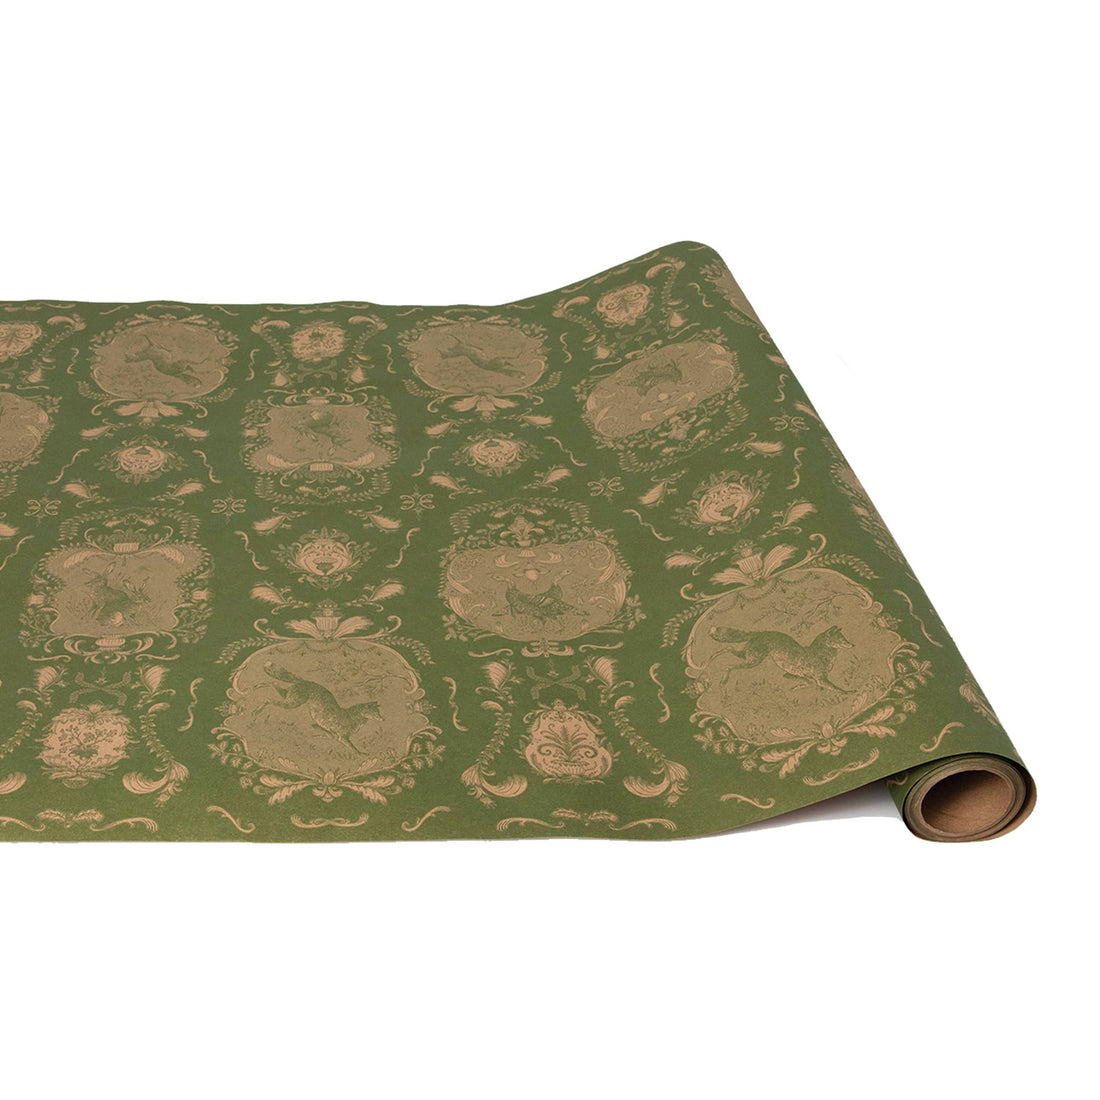 A paper roll table runner featuring a toile-style illustration of detailed filigree around vignettes containing forest animals, all in monochrome green printed on tan kraft paper.